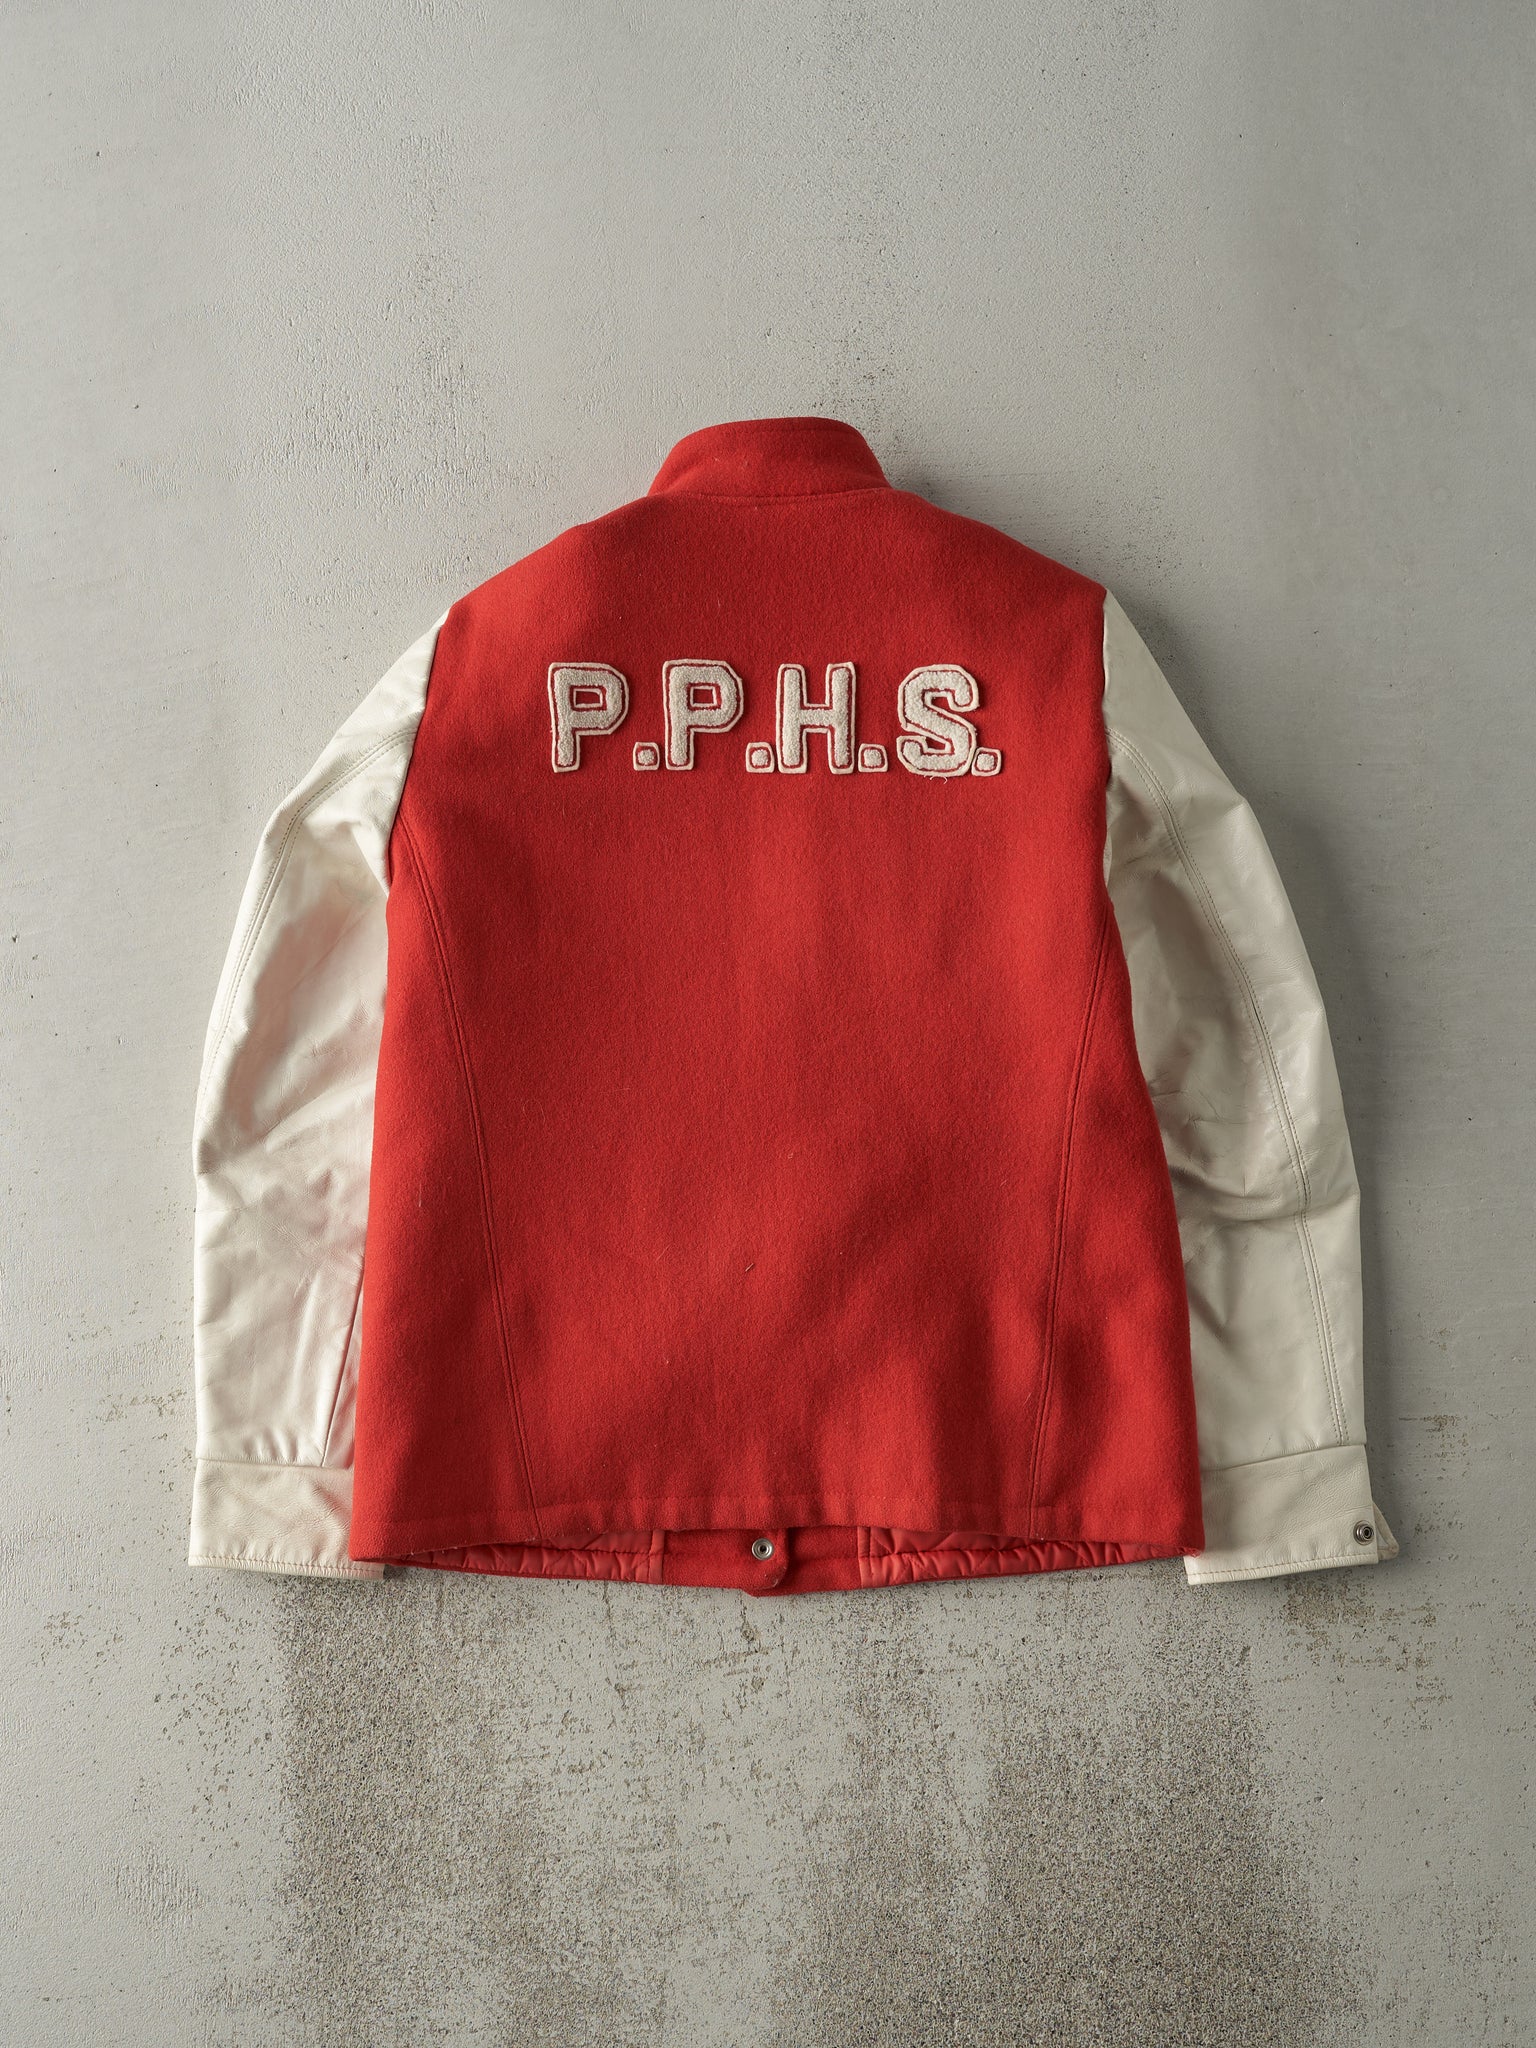 Vintage 90s Red & White Port Perry Varsity Jacket (XS)